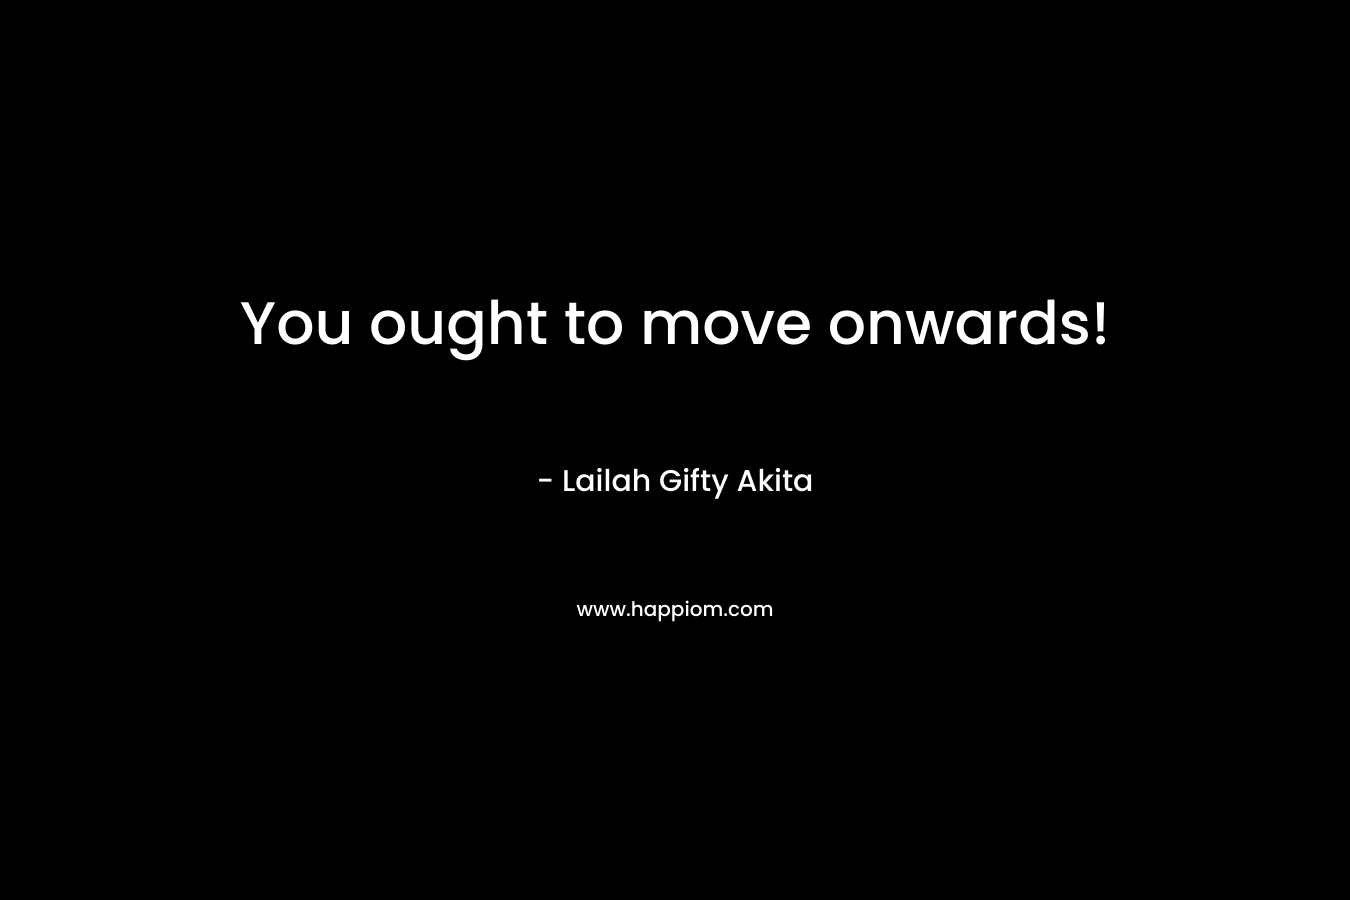 You ought to move onwards!